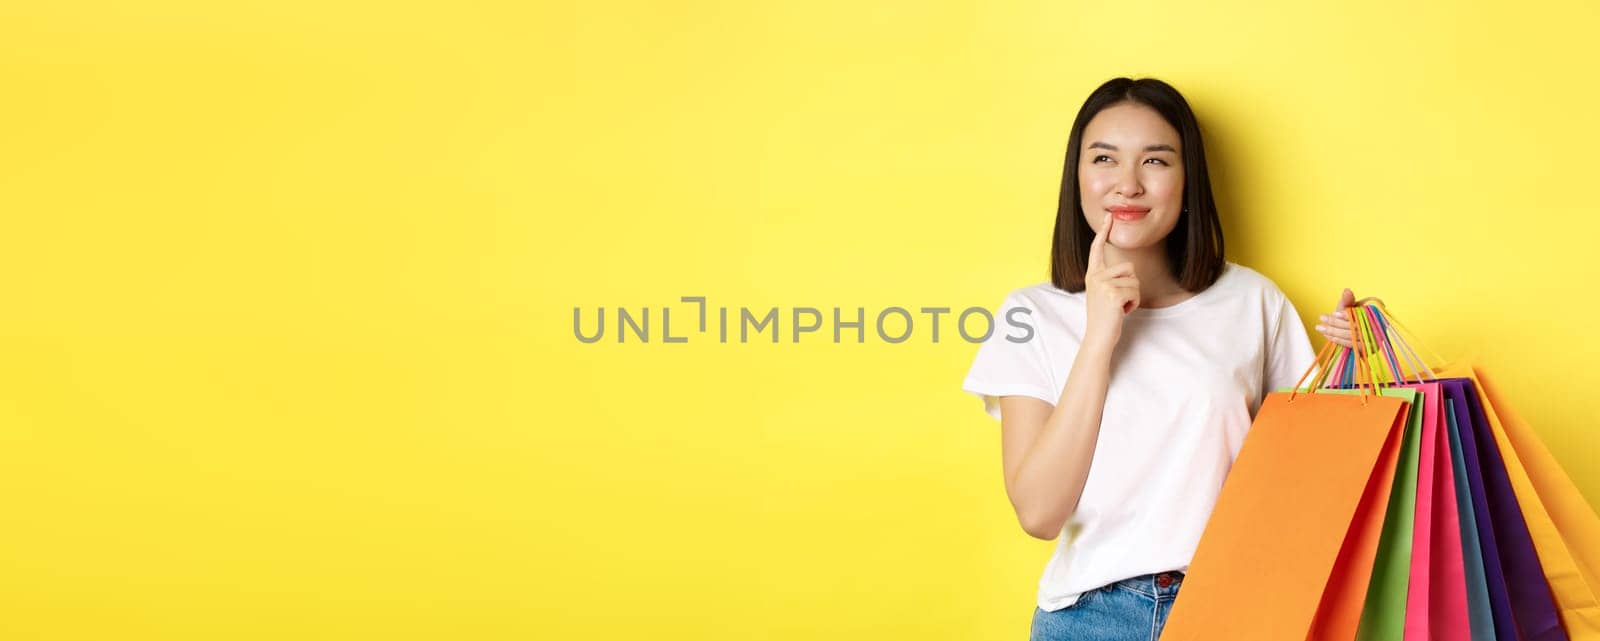 Pensive young woman smiling intrigued, showing shopping bags, thinking about buying something, standing over yellow background.